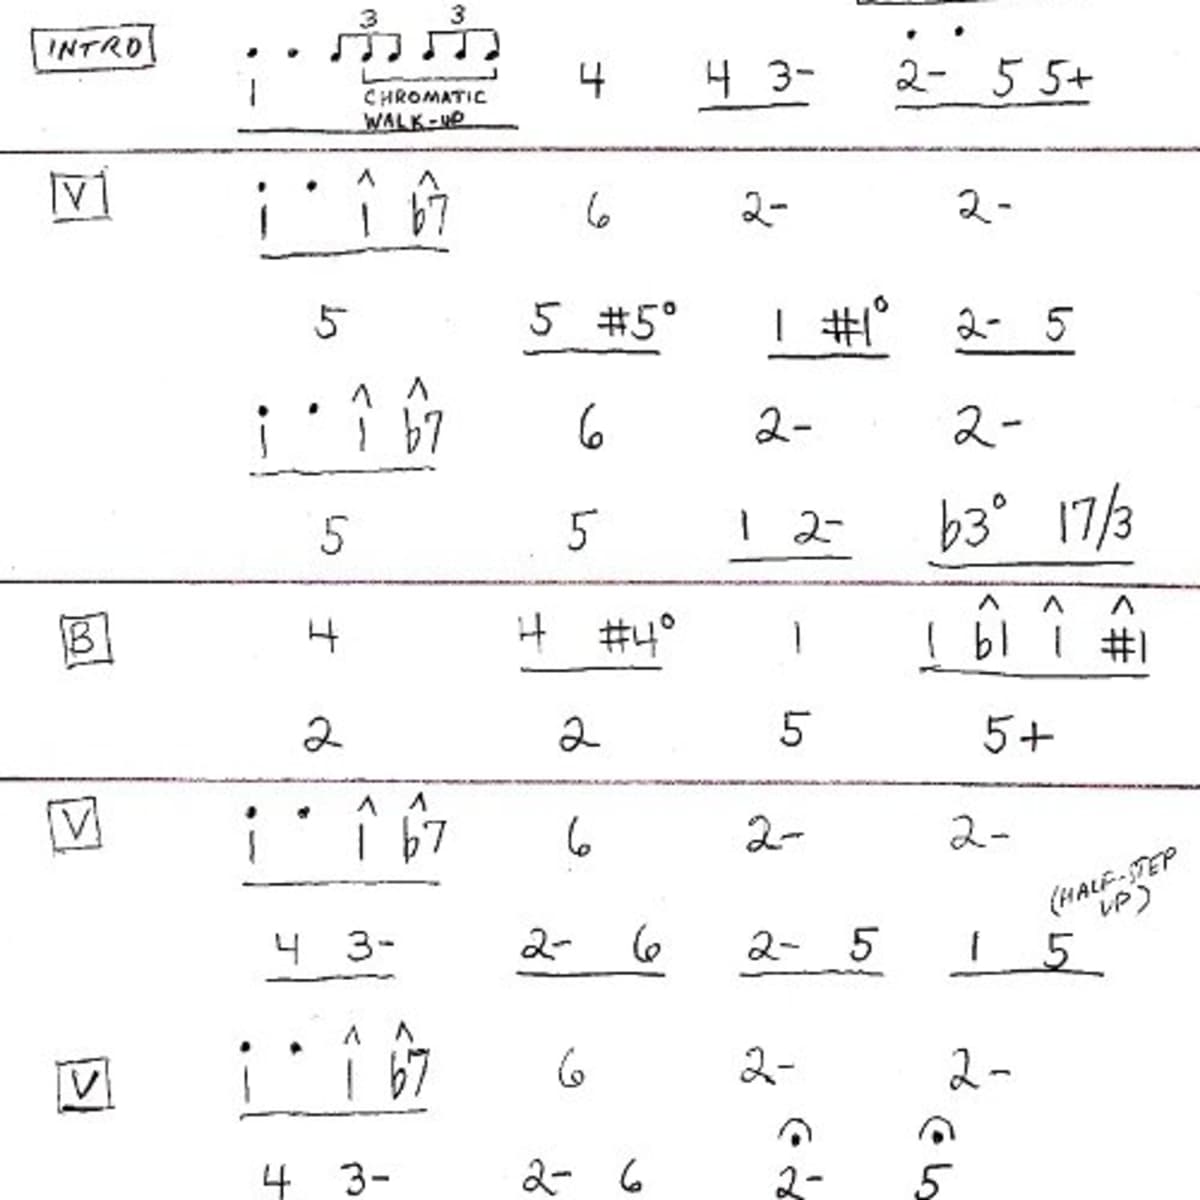 what do lines under numbers mean nashville number system chart